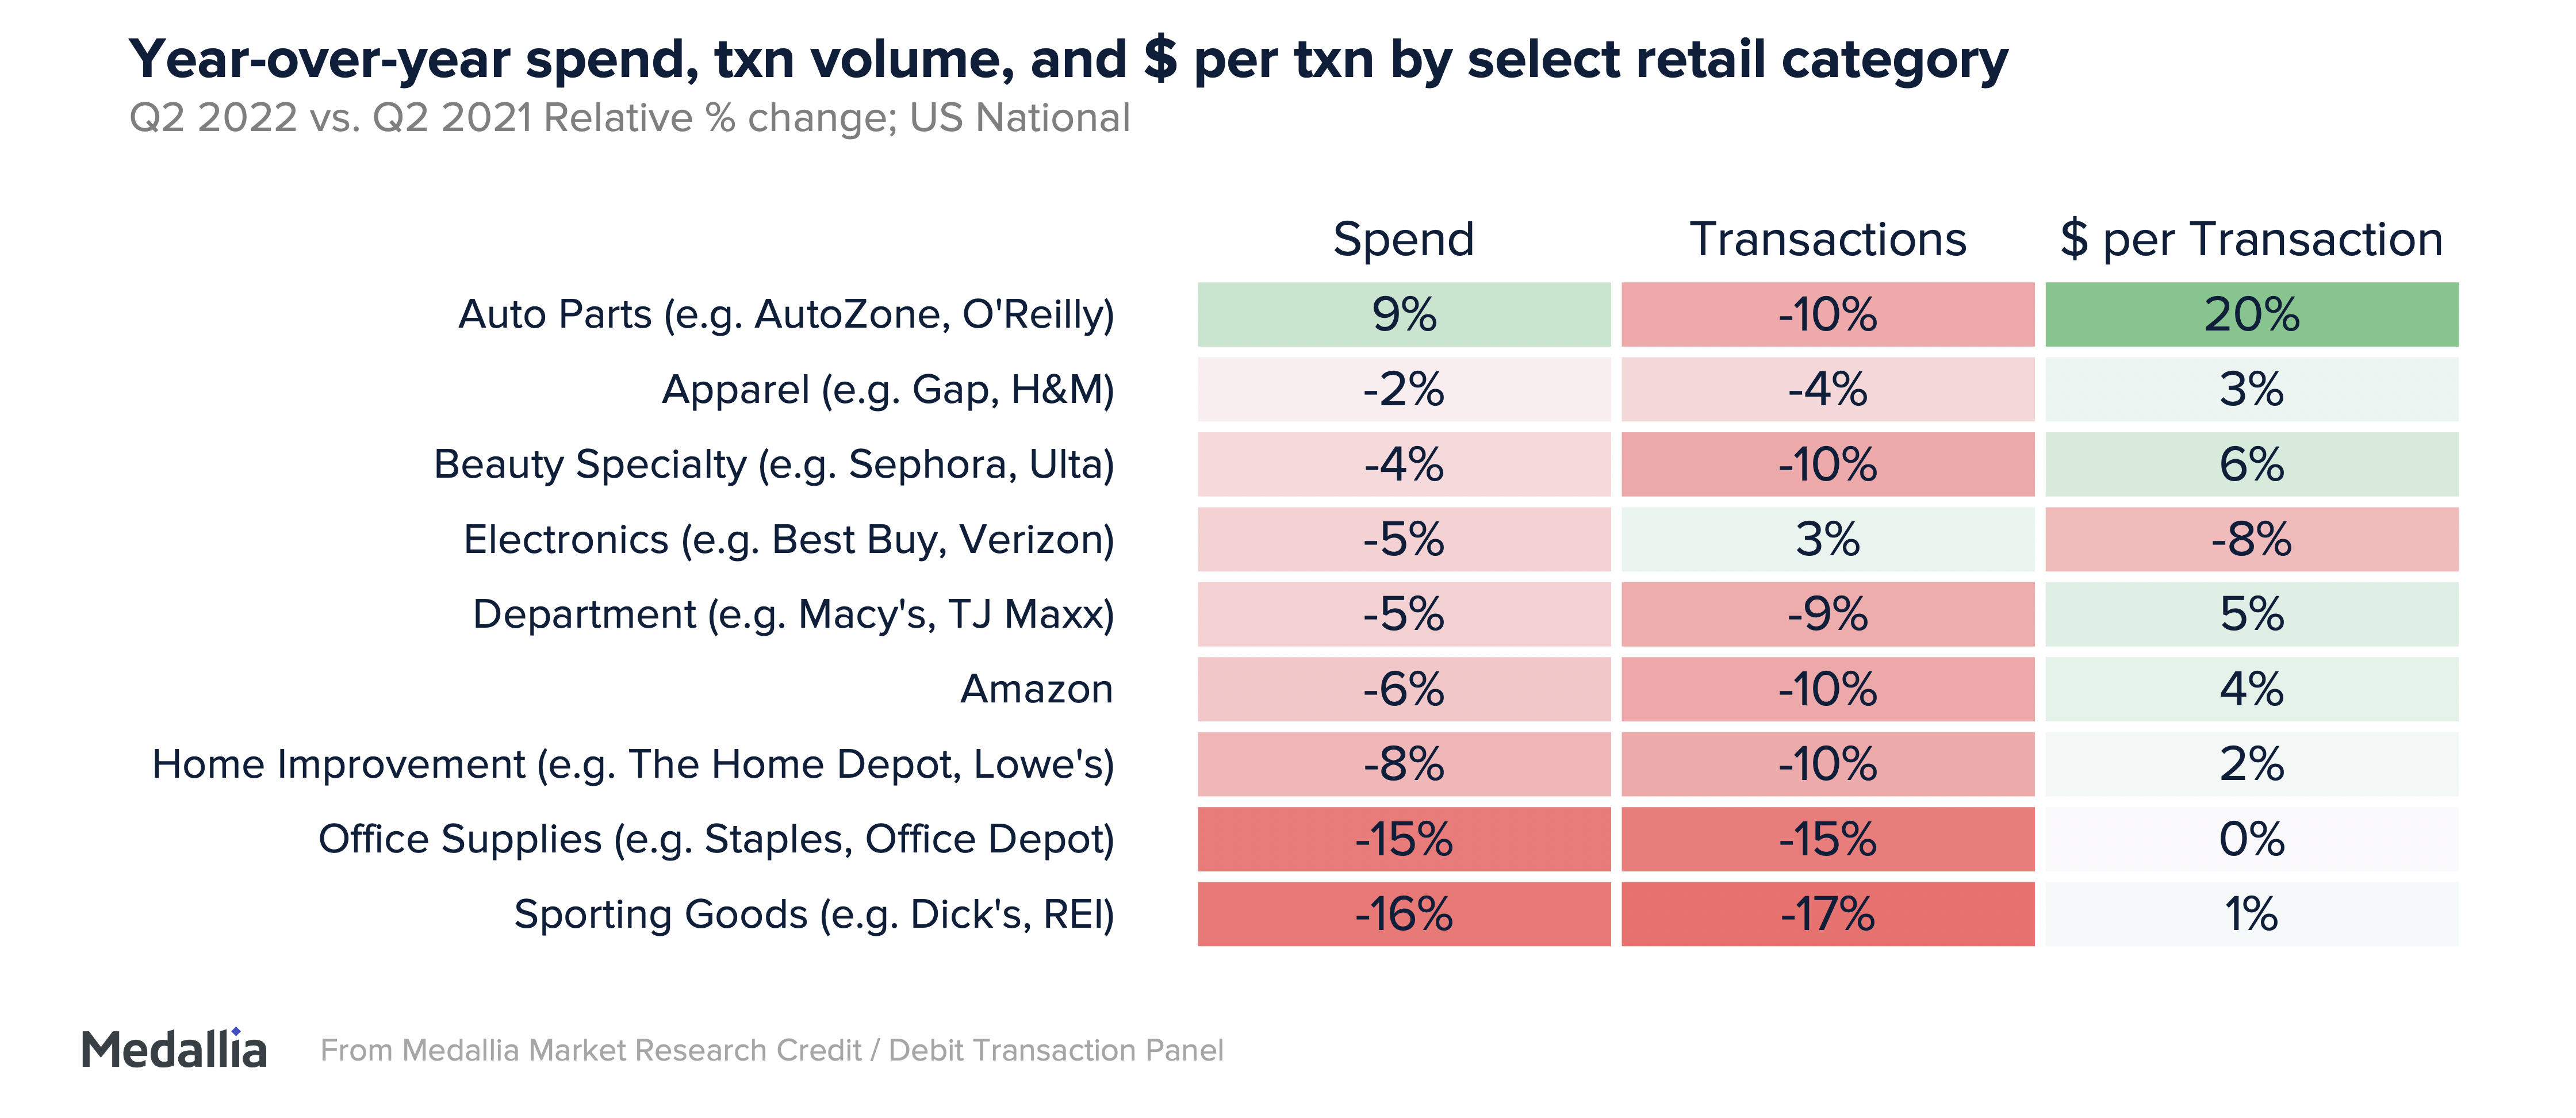 Year over year spend by retail category. Auto parts are up by 9% while other popular categories are slightly down.